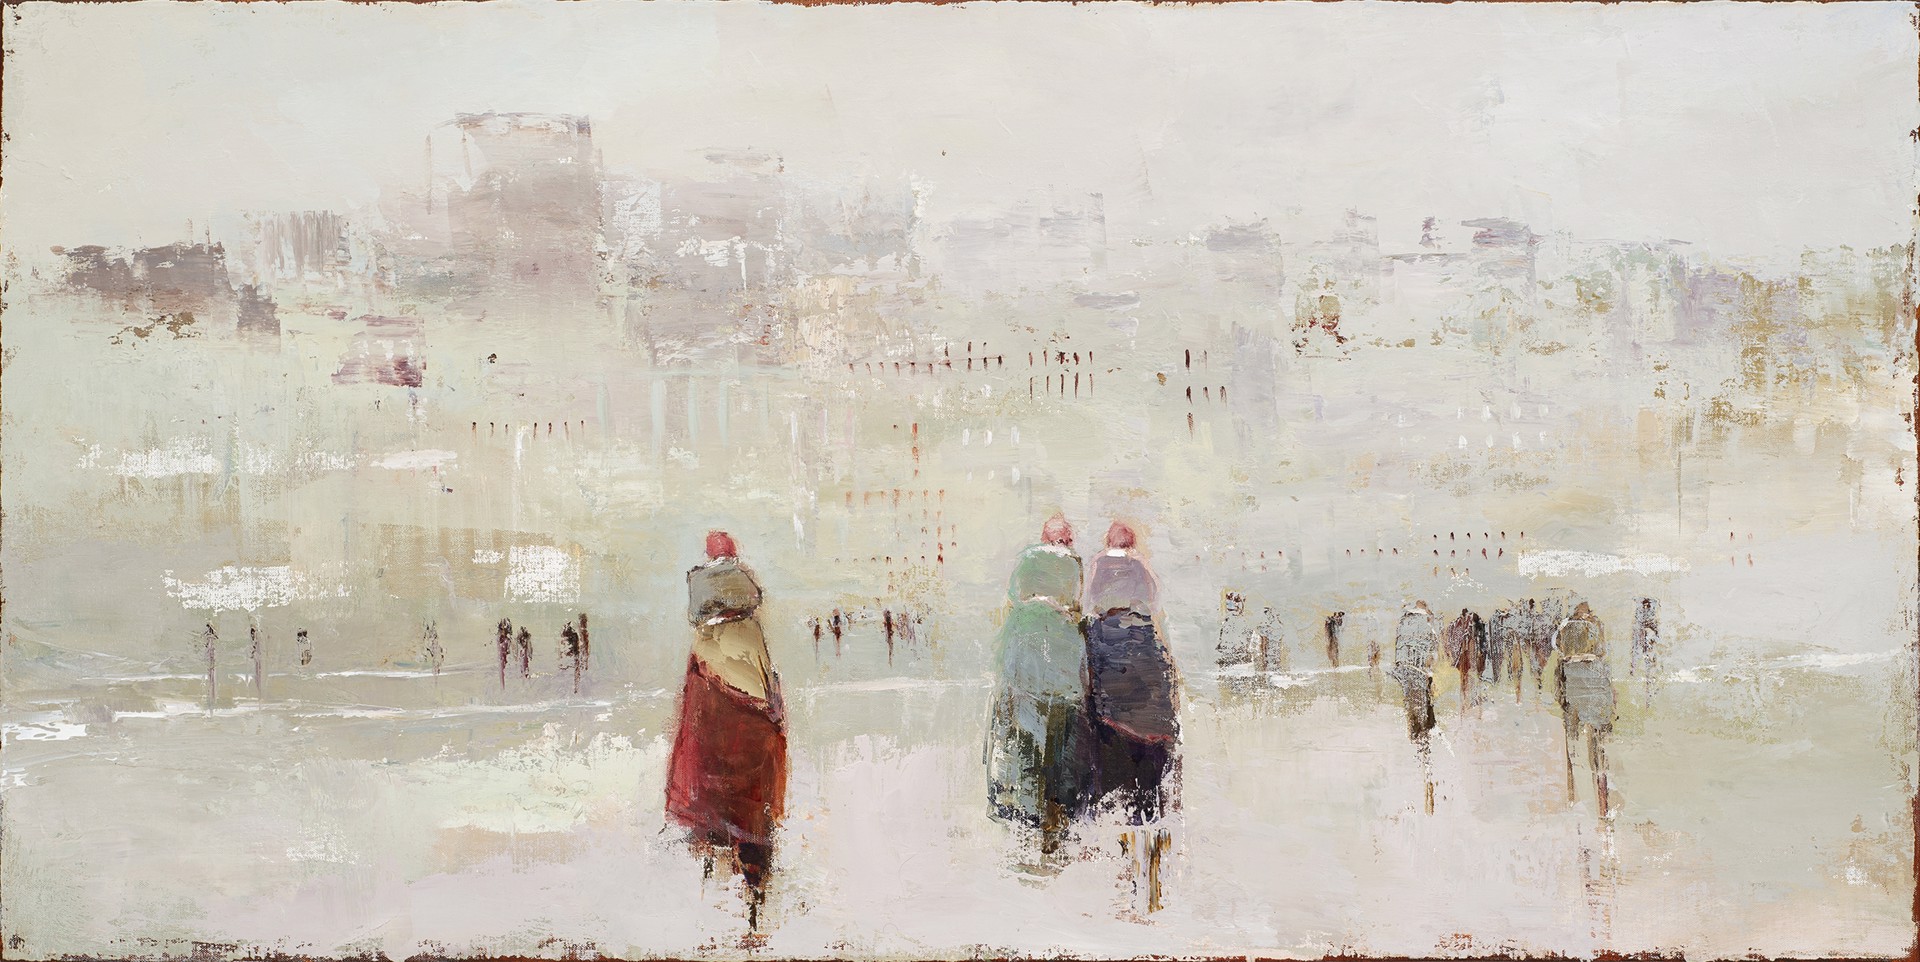 Wandering in a coral grove by France Jodoin